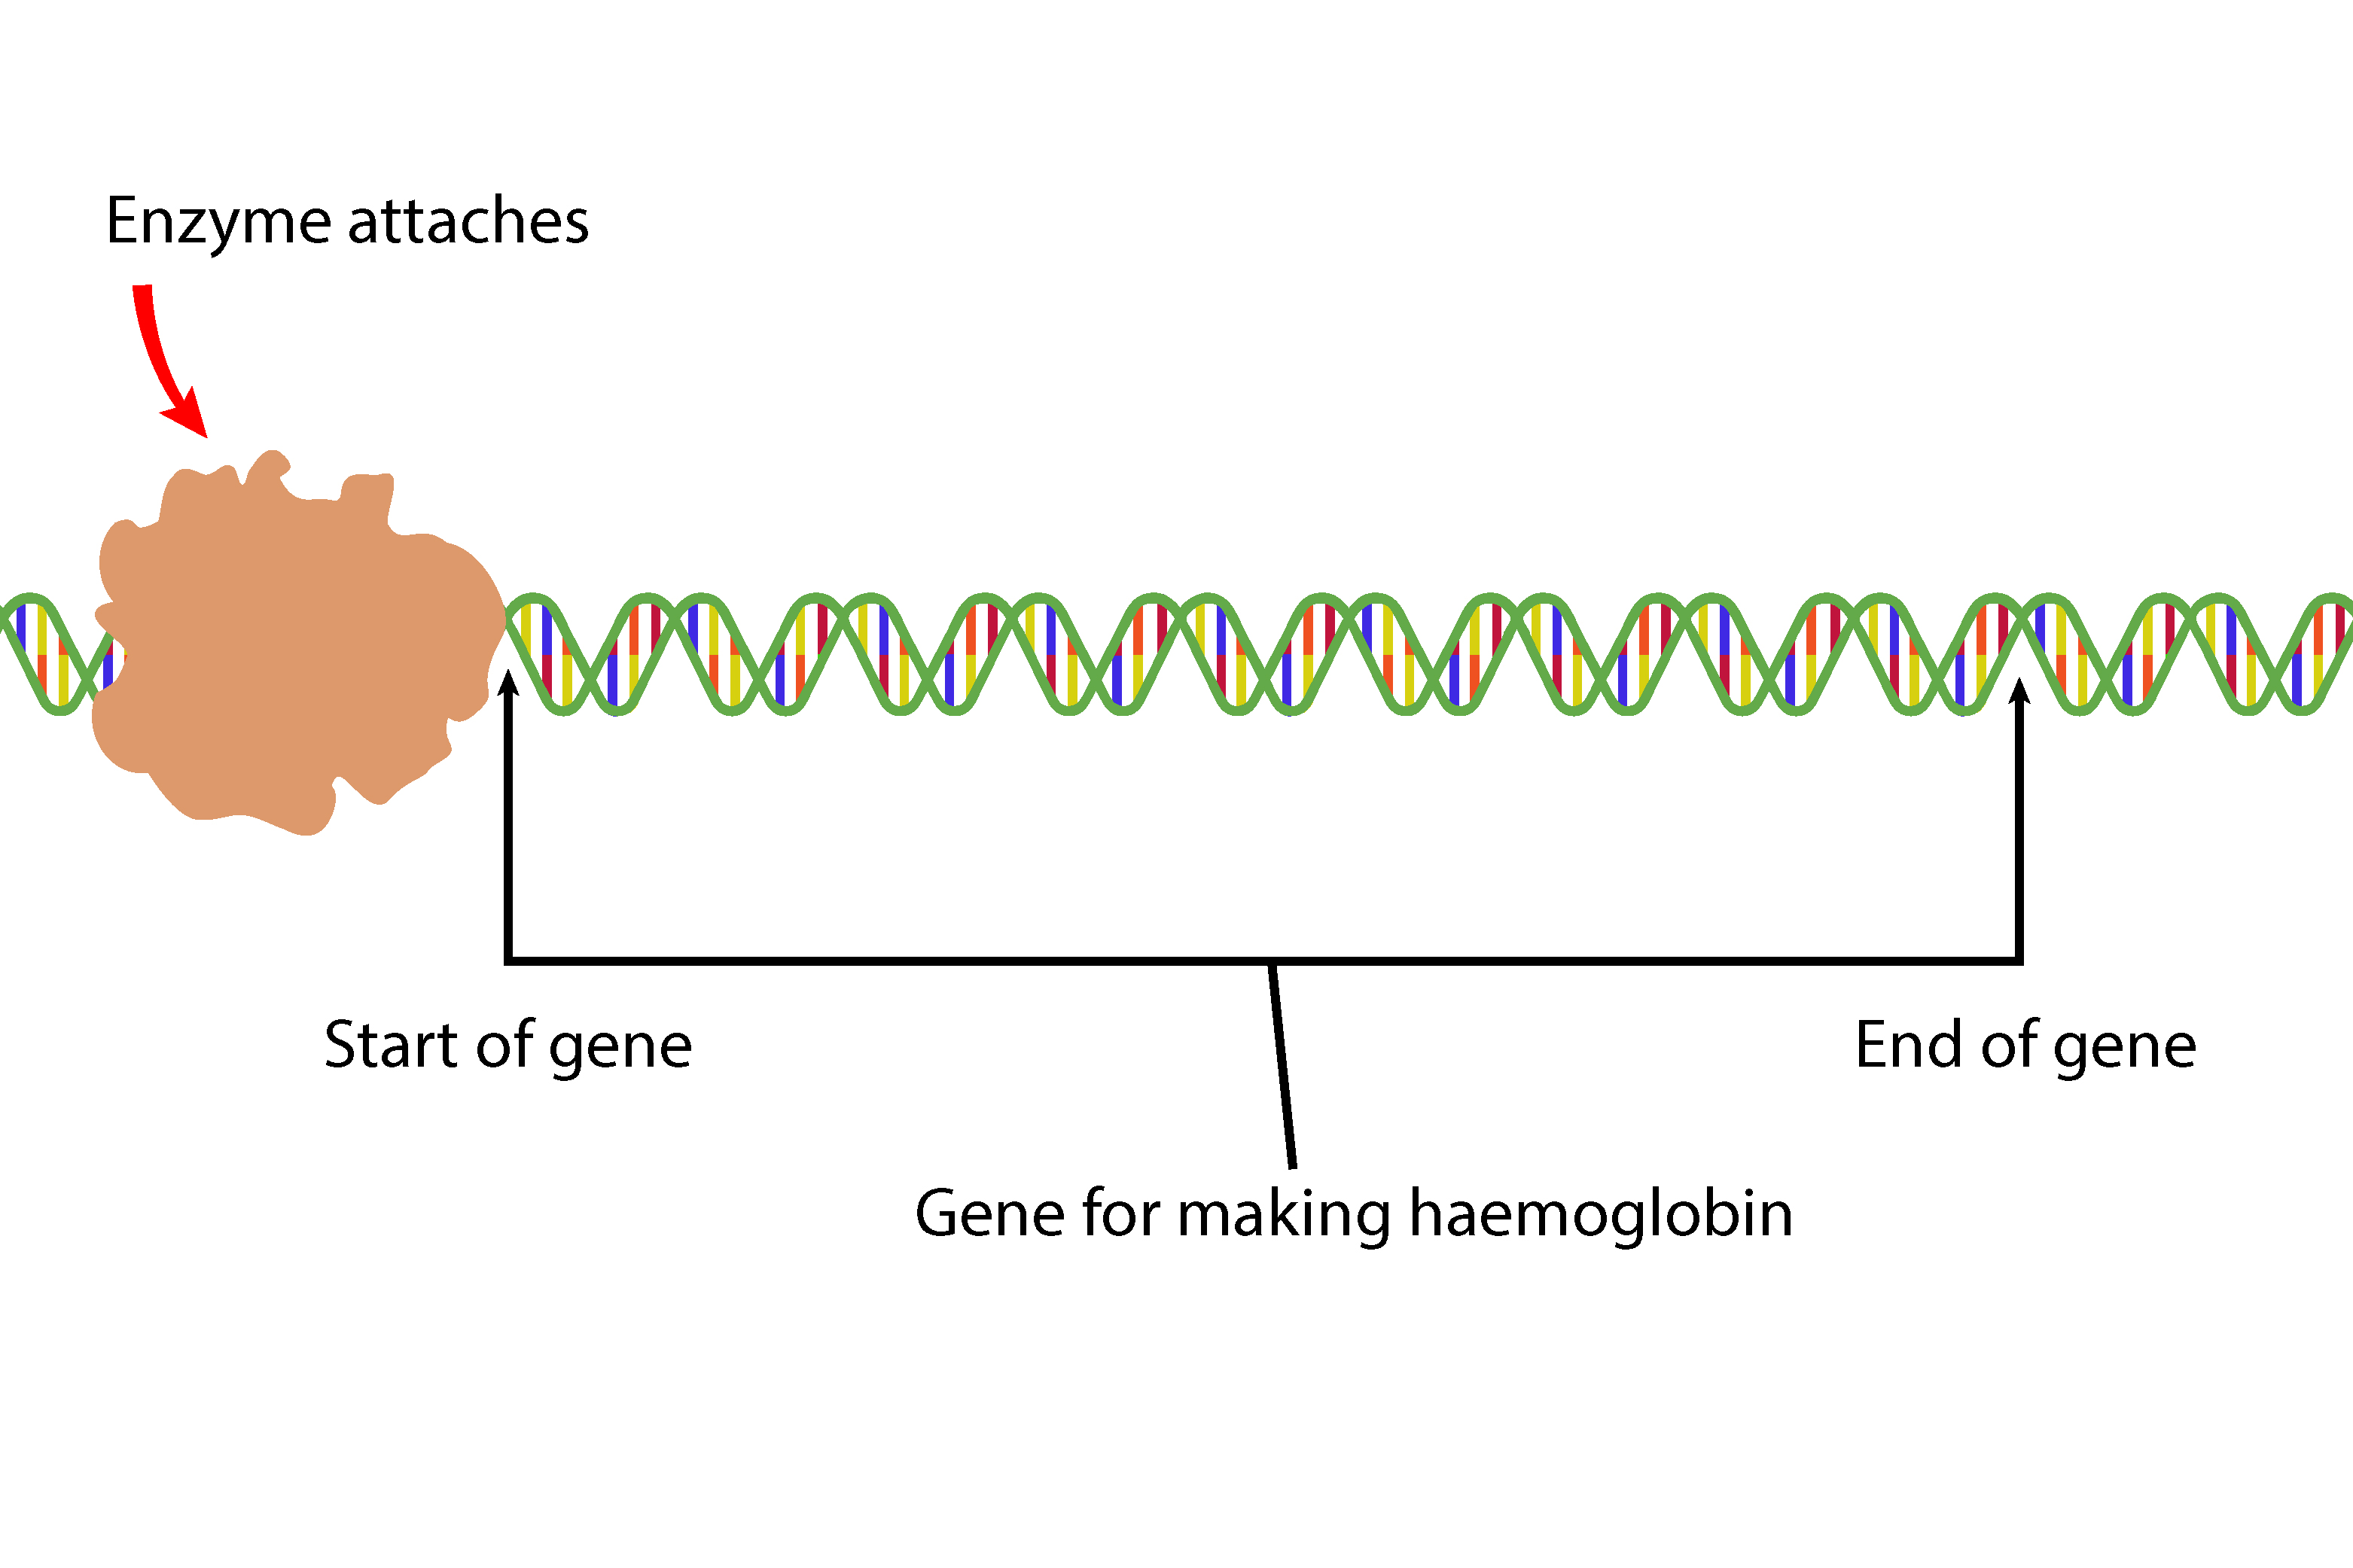 Enzymes attach to a DNA strand but at the start of the haemoglobin gene segment ready to read